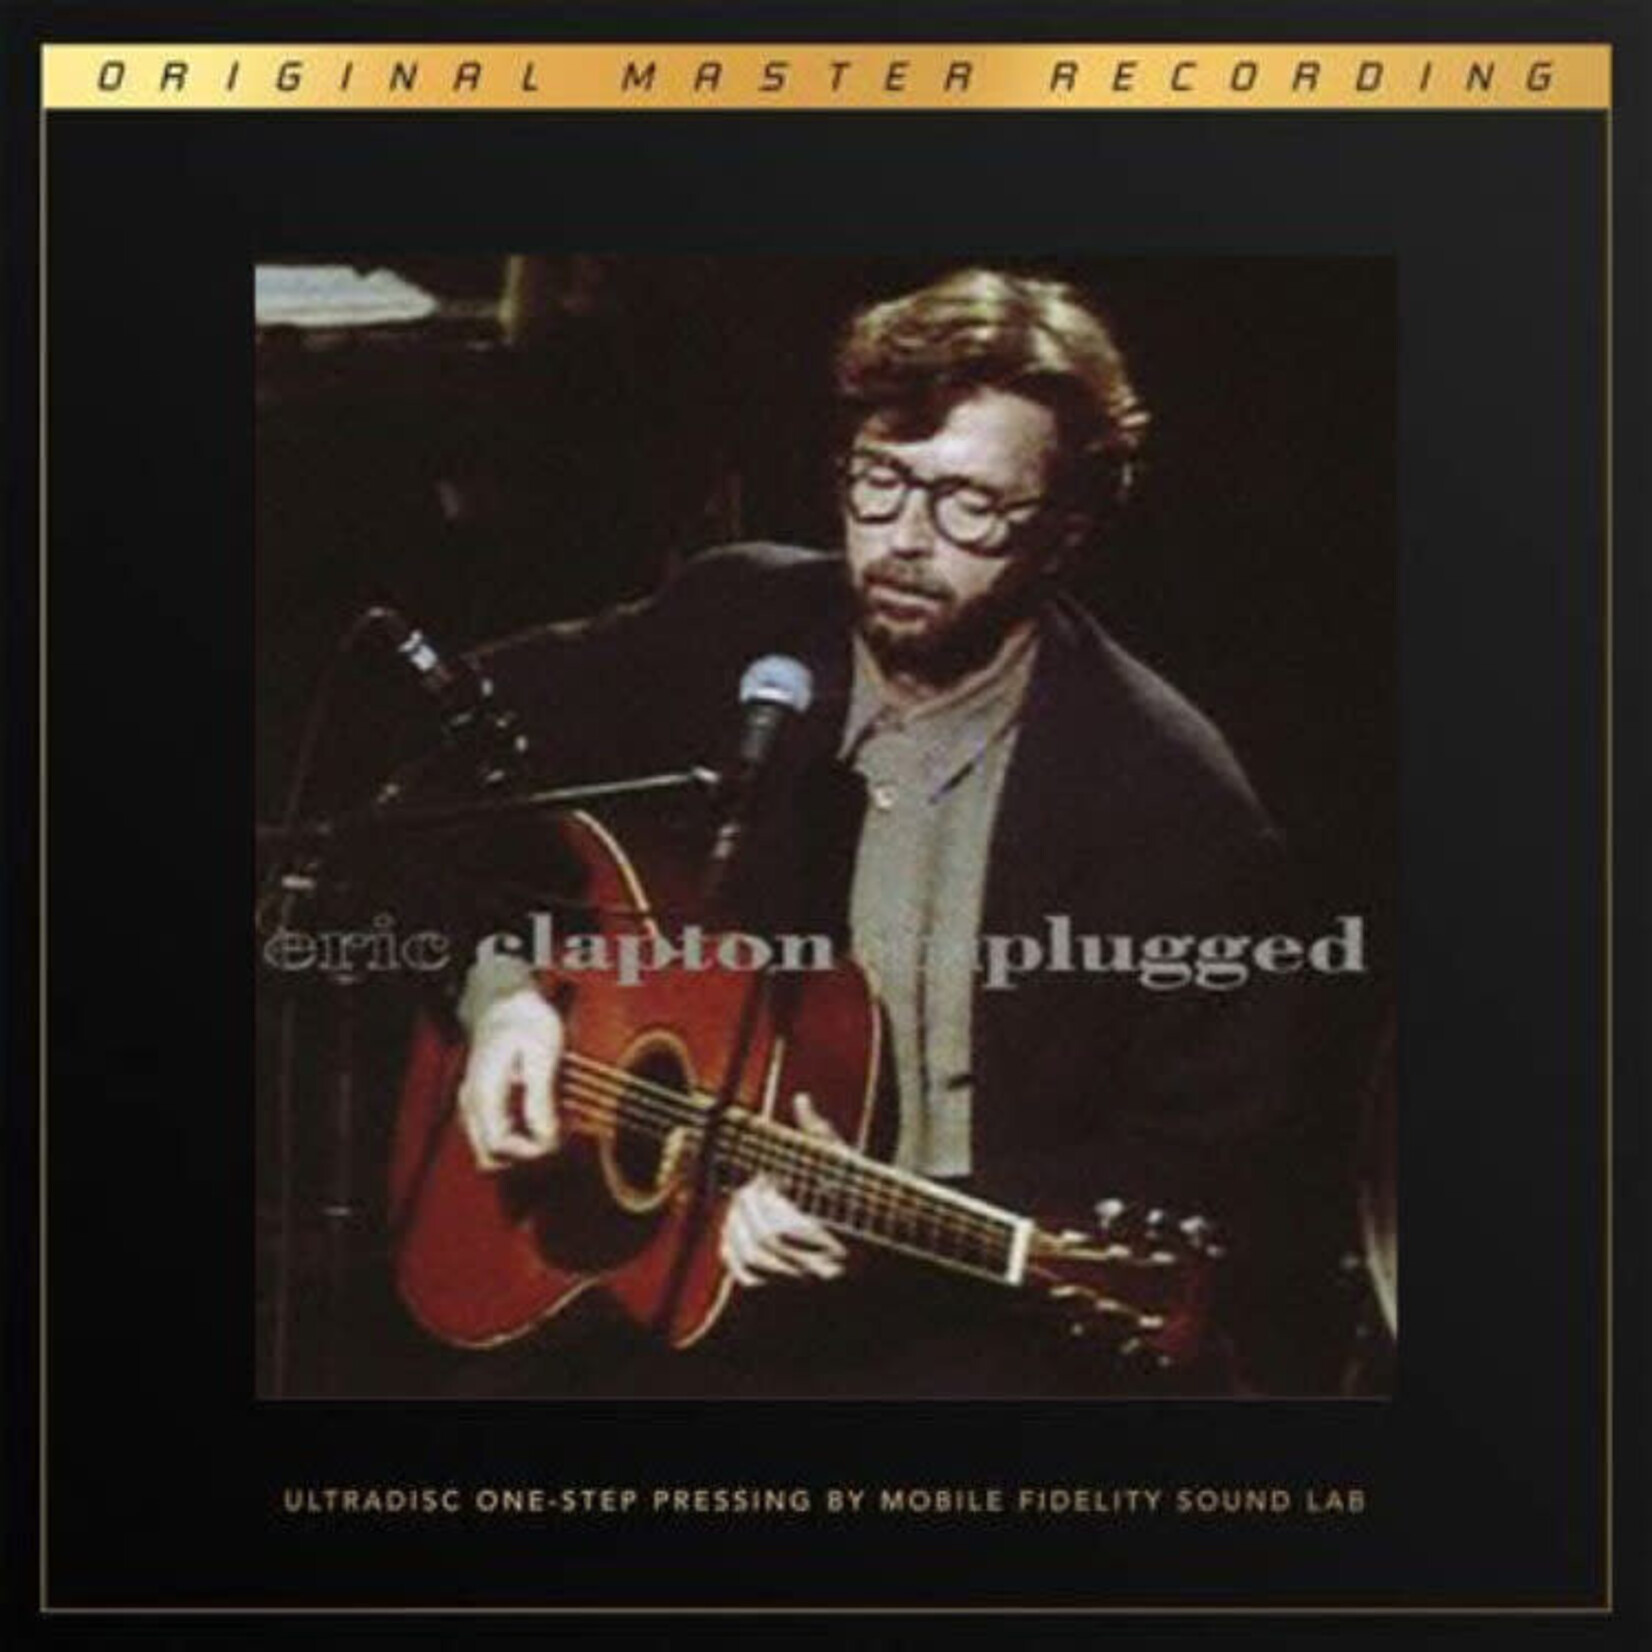 [New] Clapton, Eric: Unplugged (2LP, ultradisc one-step) [MOBILE FIDELITY]